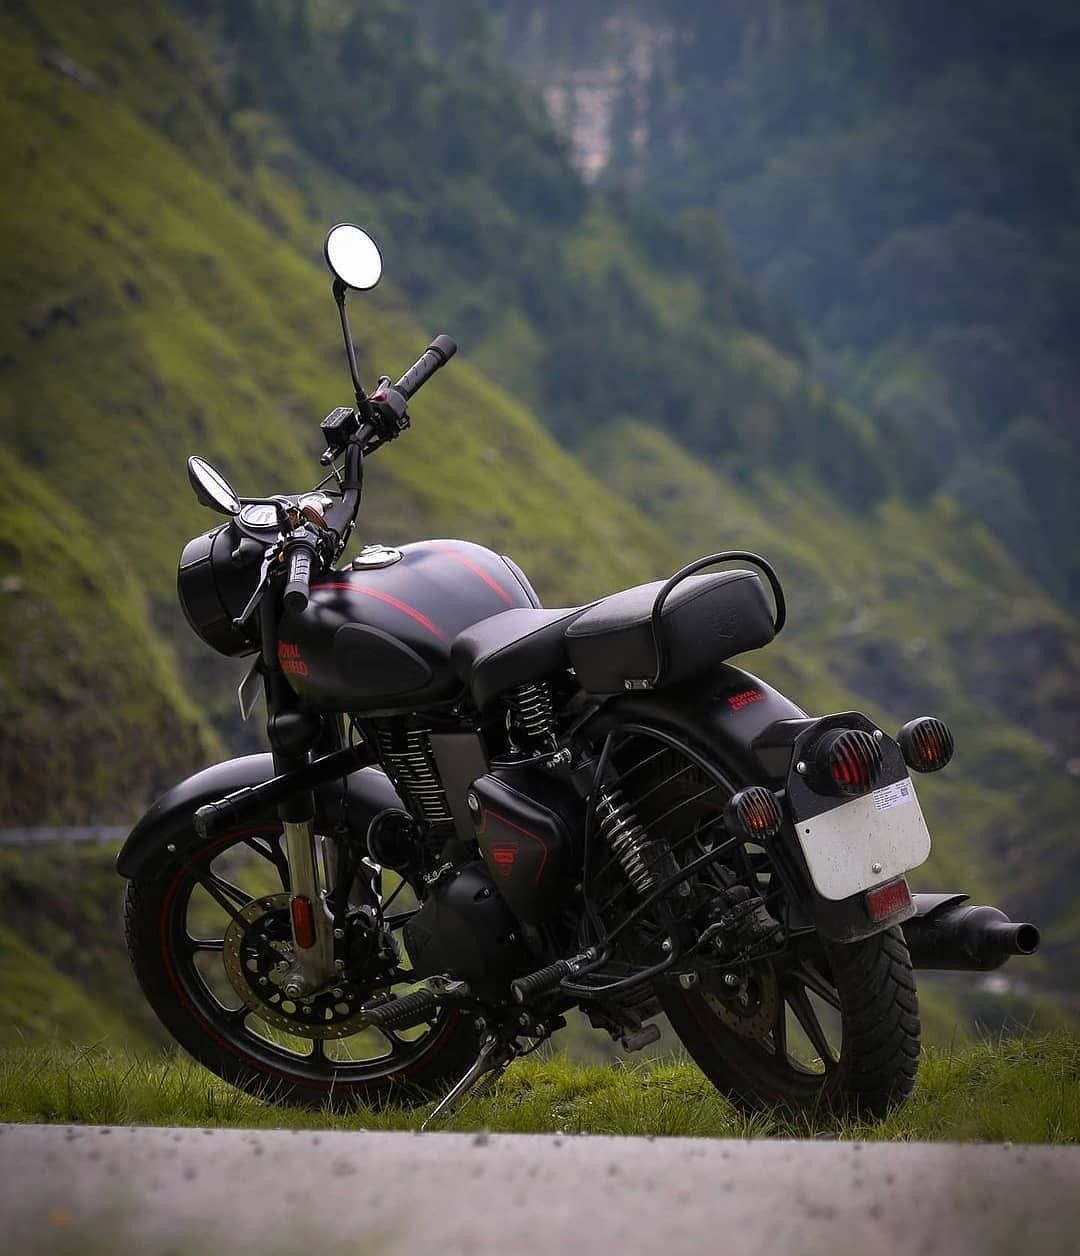 Royal Enfield Bike with Black & Red colour combinations